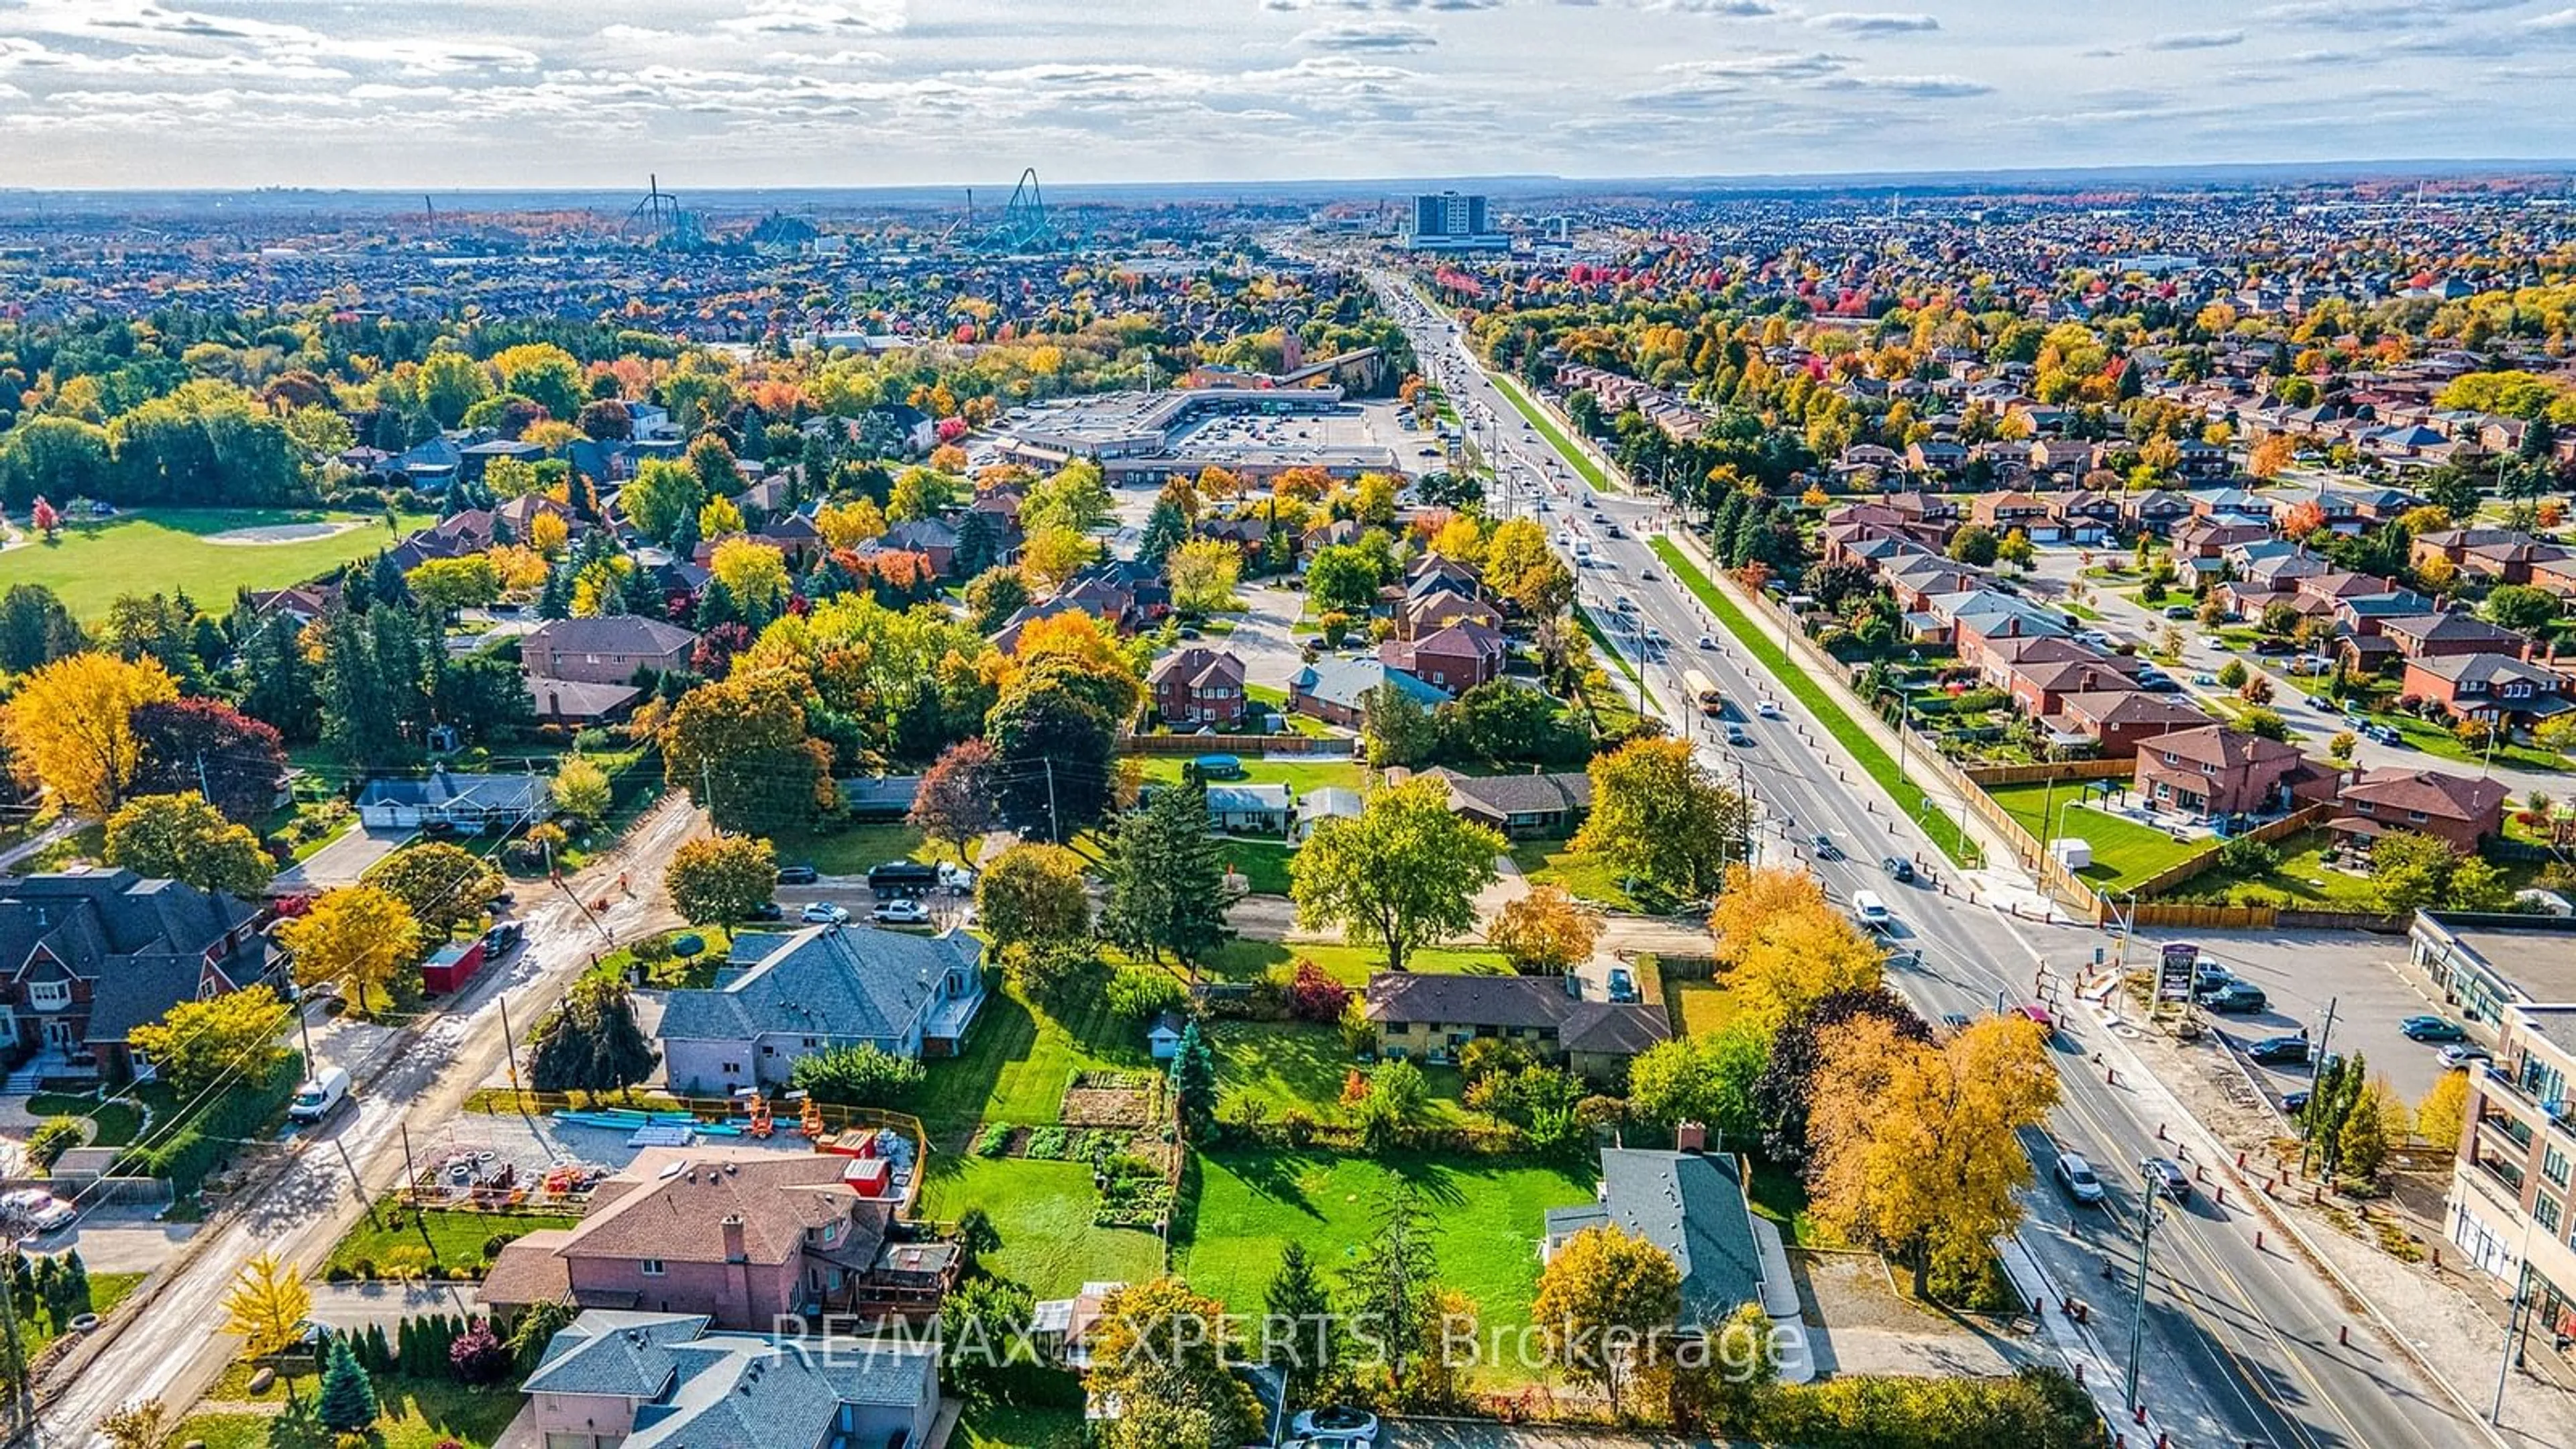 Lakeview for 2355 Major Mackenzie Dr, Vaughan Ontario L6A 3Z2